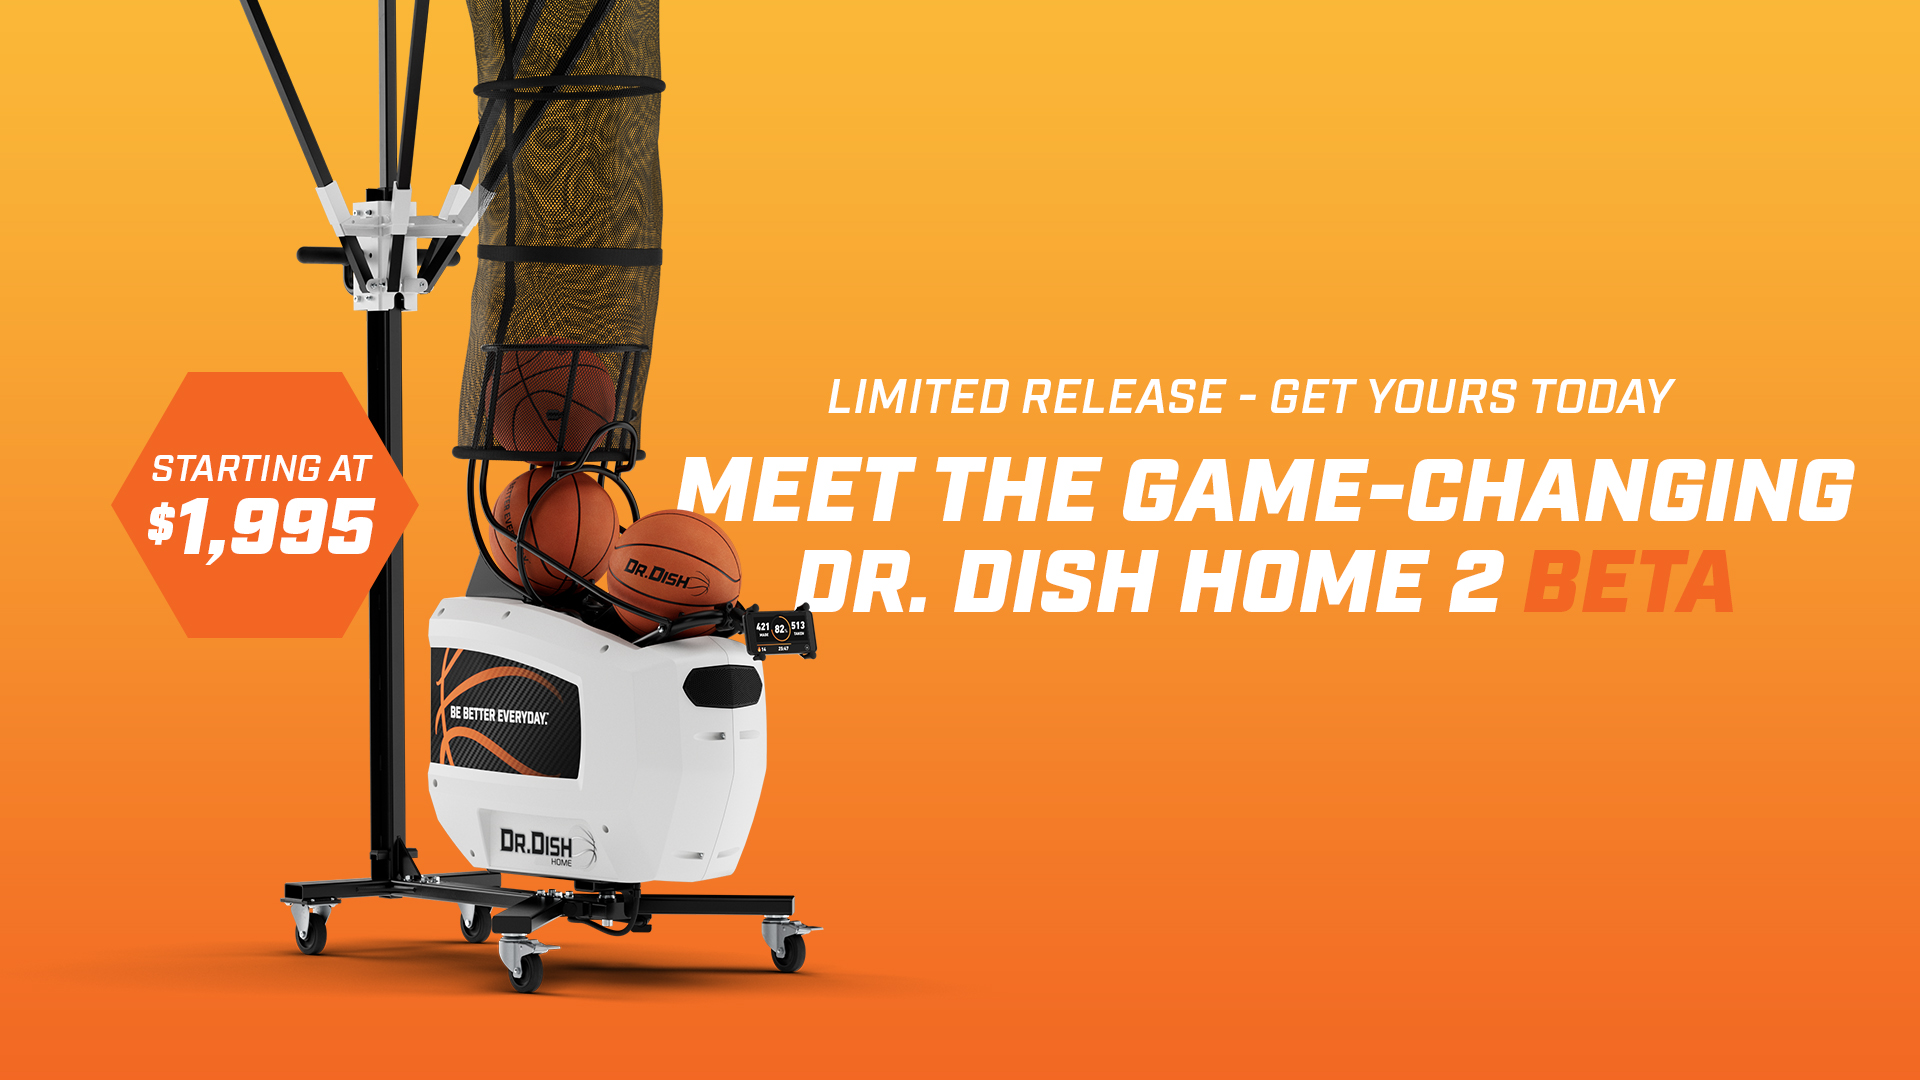 Meet Dr. Dish Home 2 BETA - Only here for a limited time